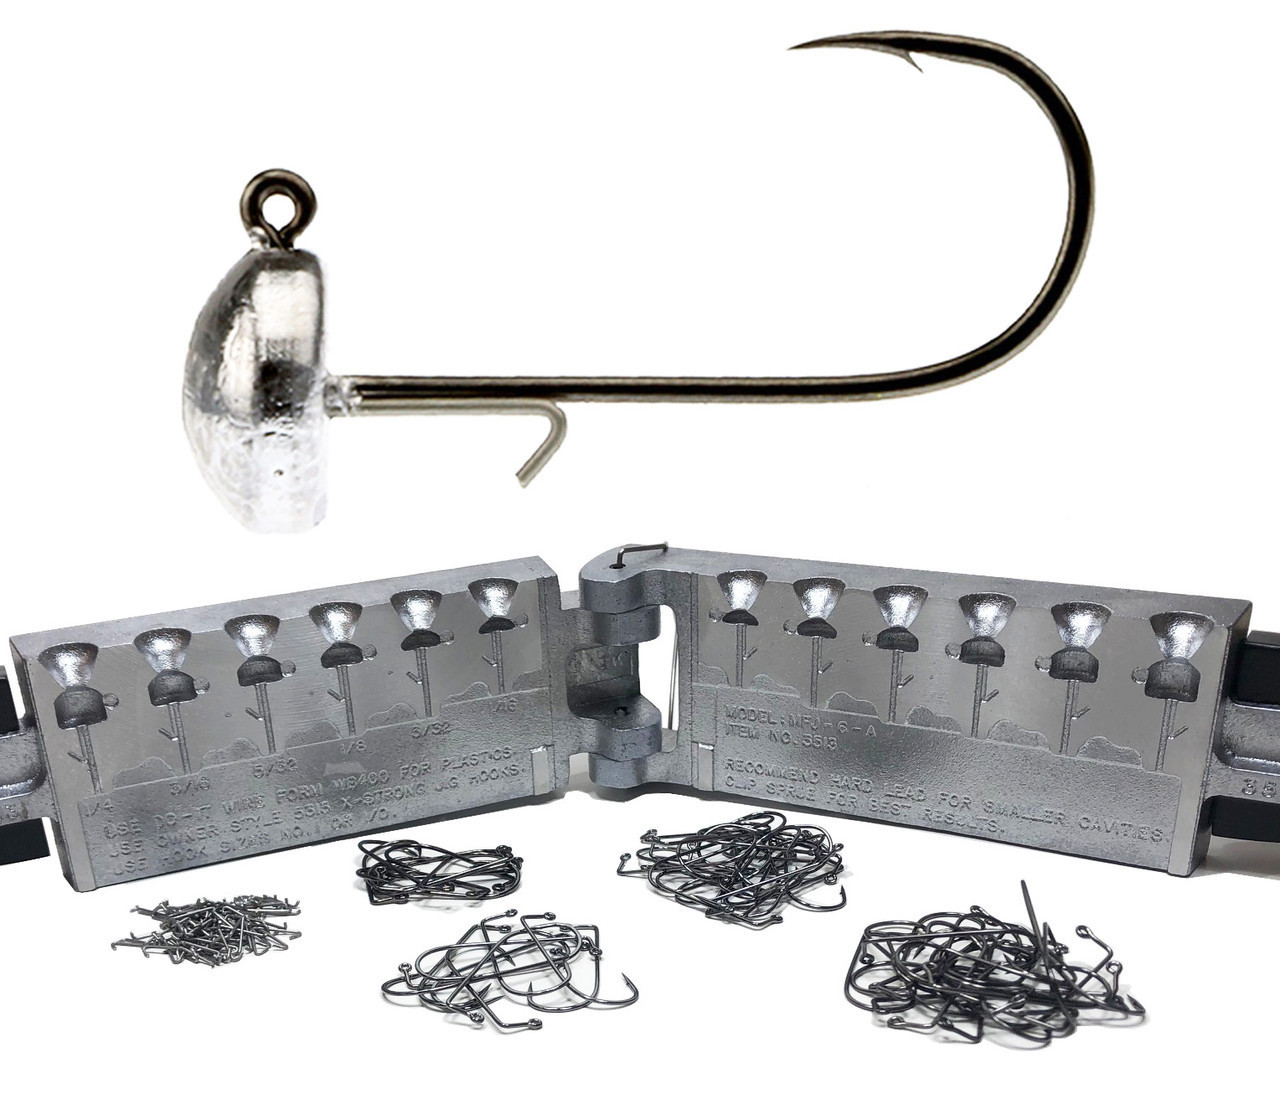 Do-It Midwest Finesse Jig Mold Starter Kit - Barlow's Tackle